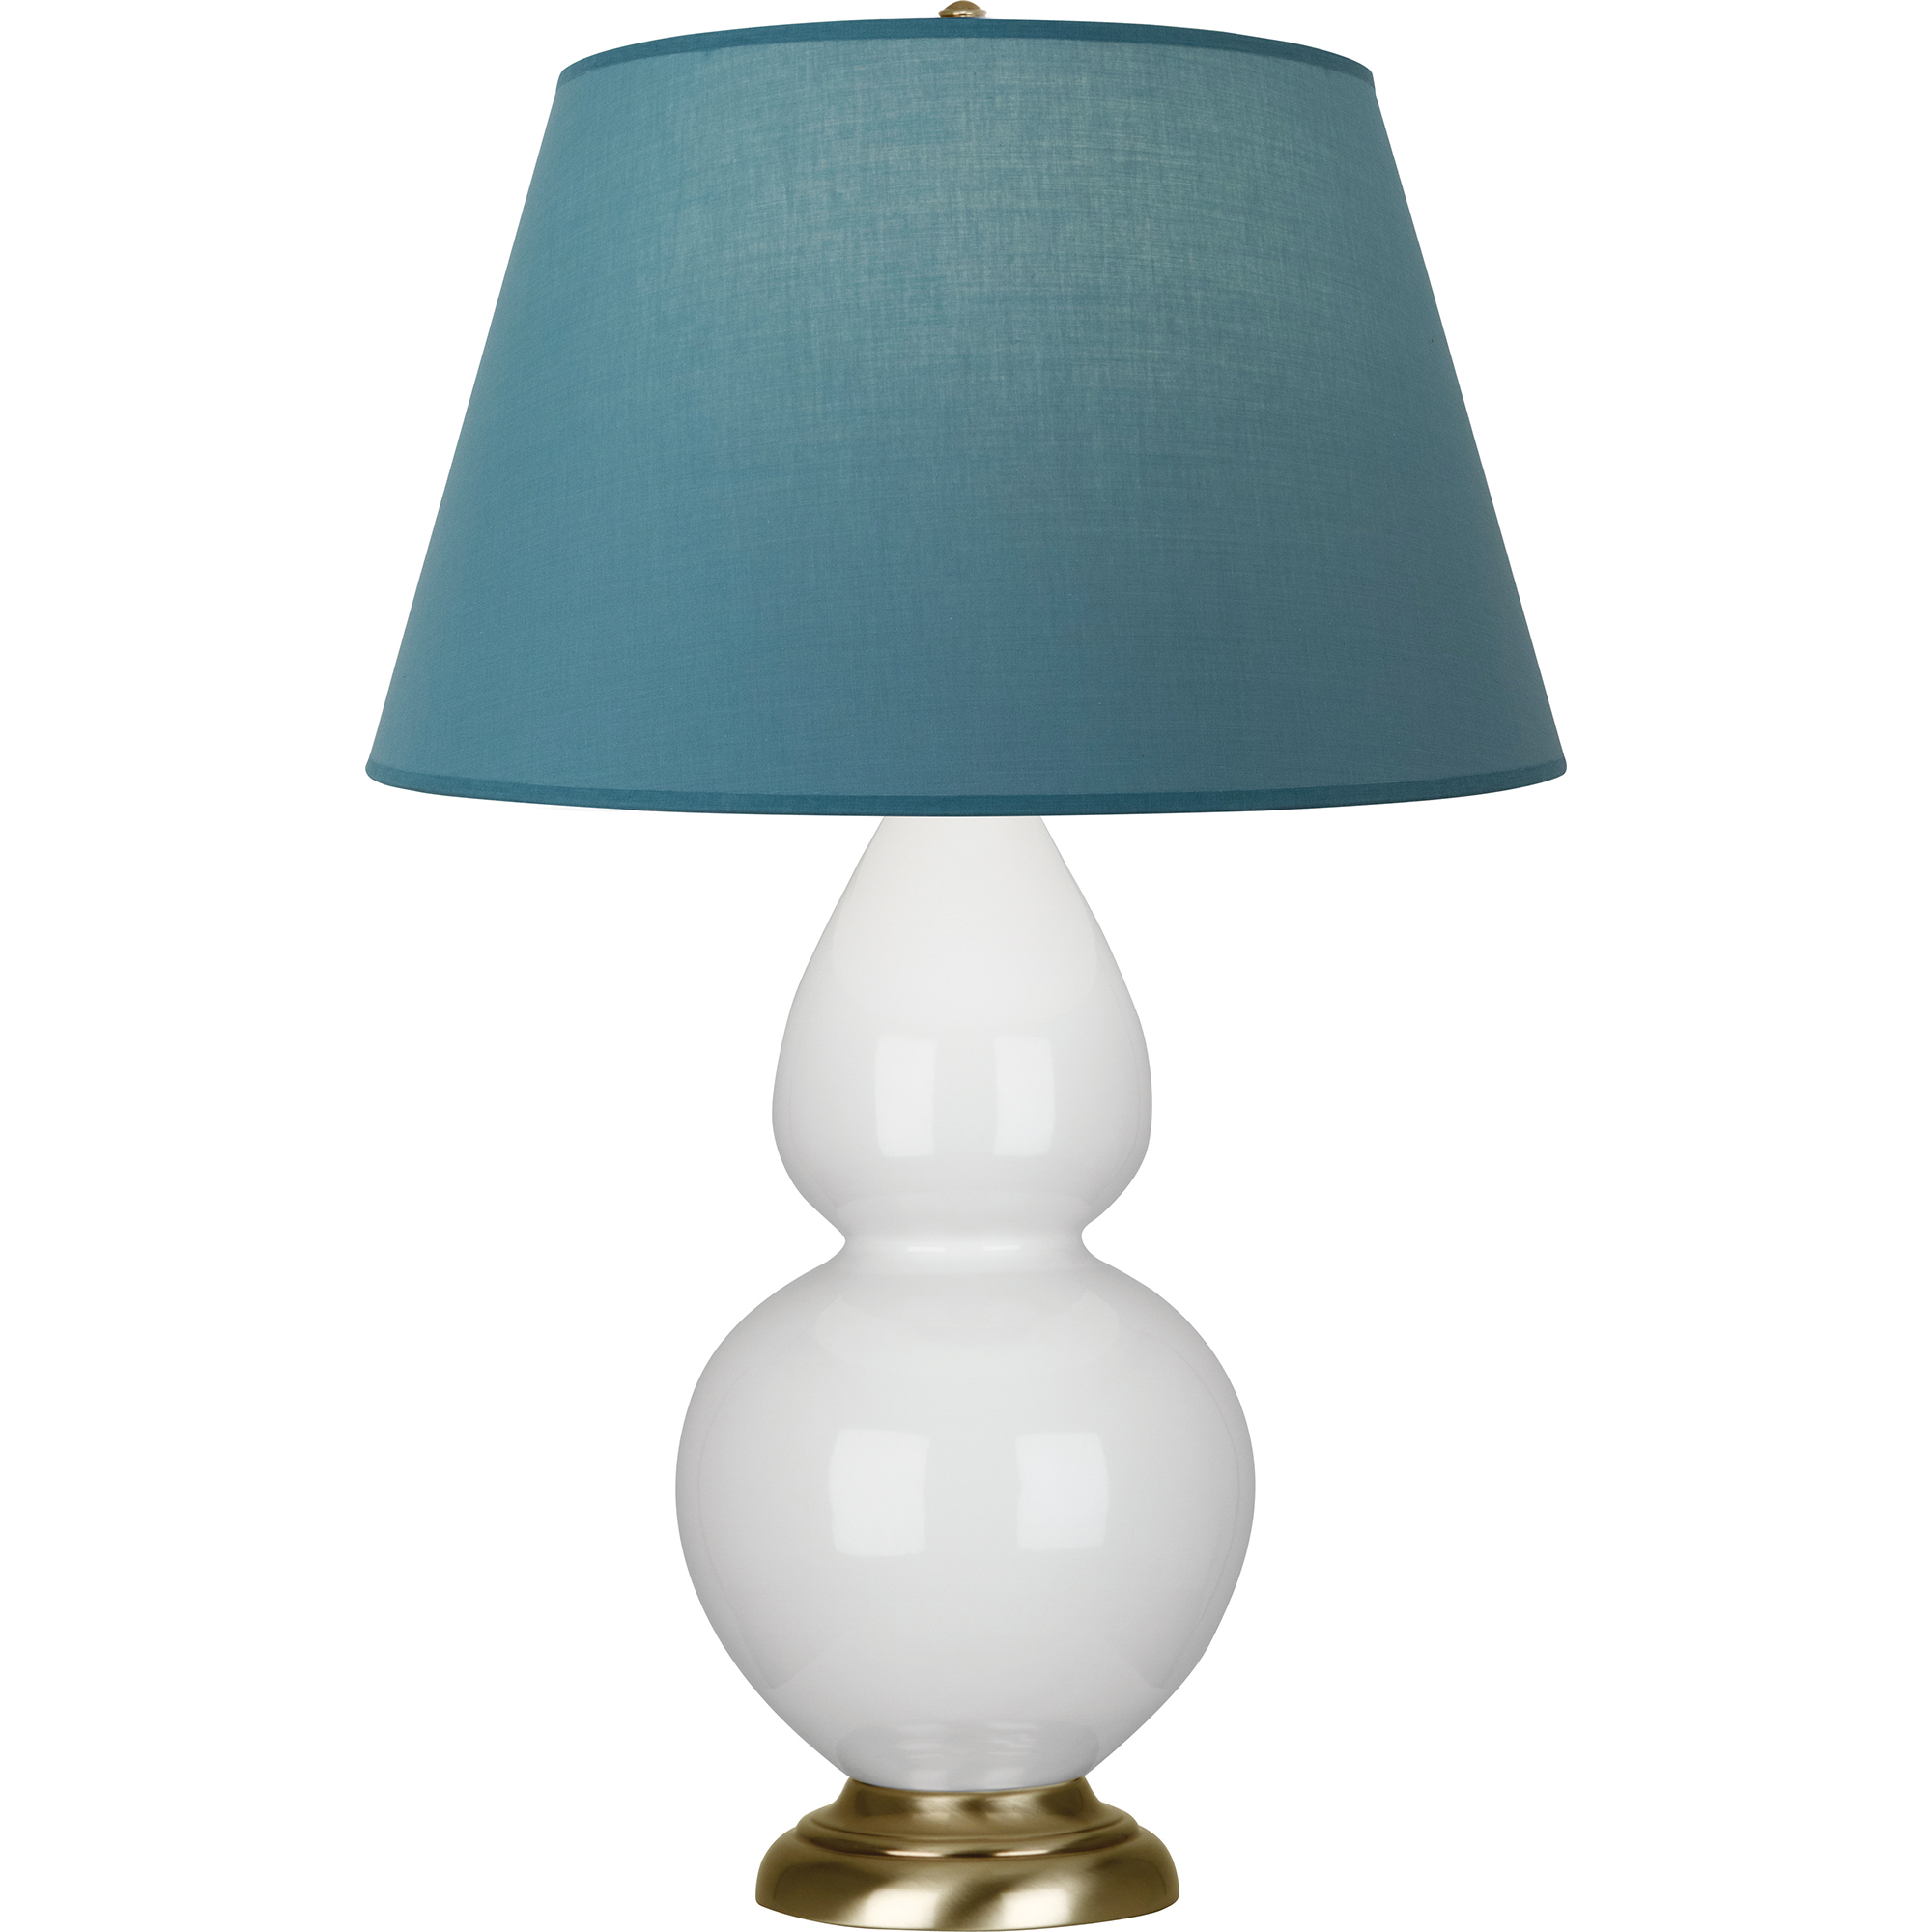 Double Gourd Table Lamp Style #1660B